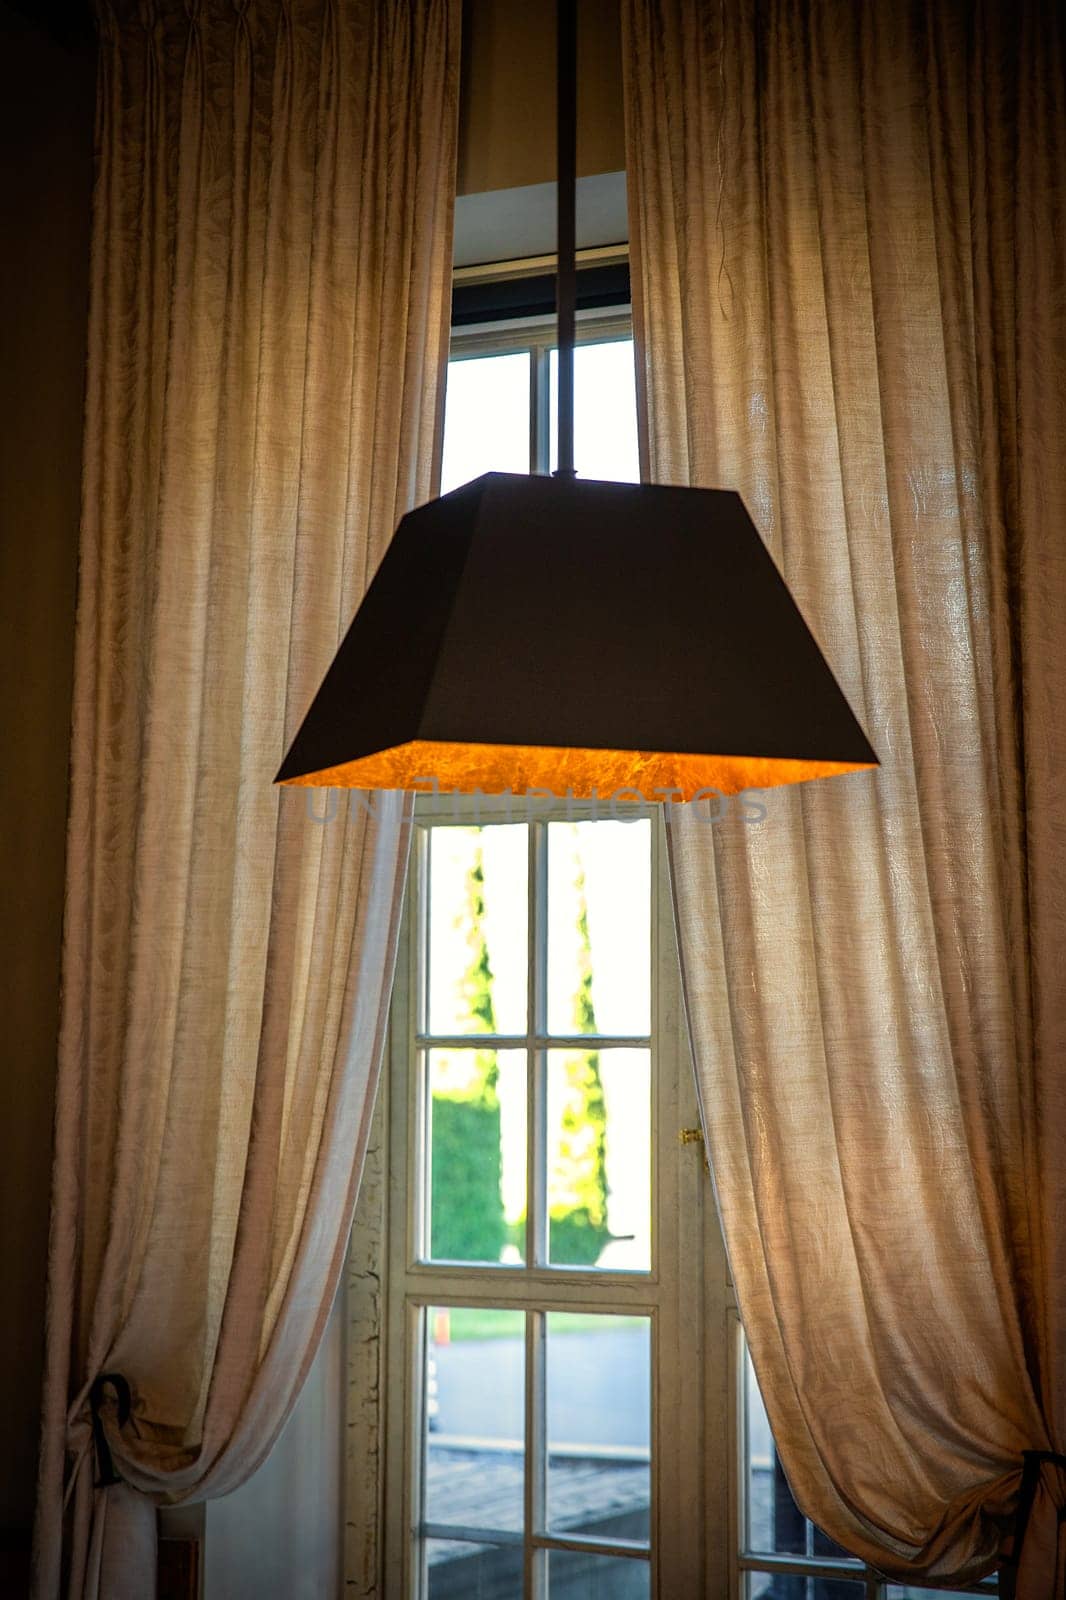 Modern brown lamp hanging from the ceiling shines with warm light in front of a window with curtains.